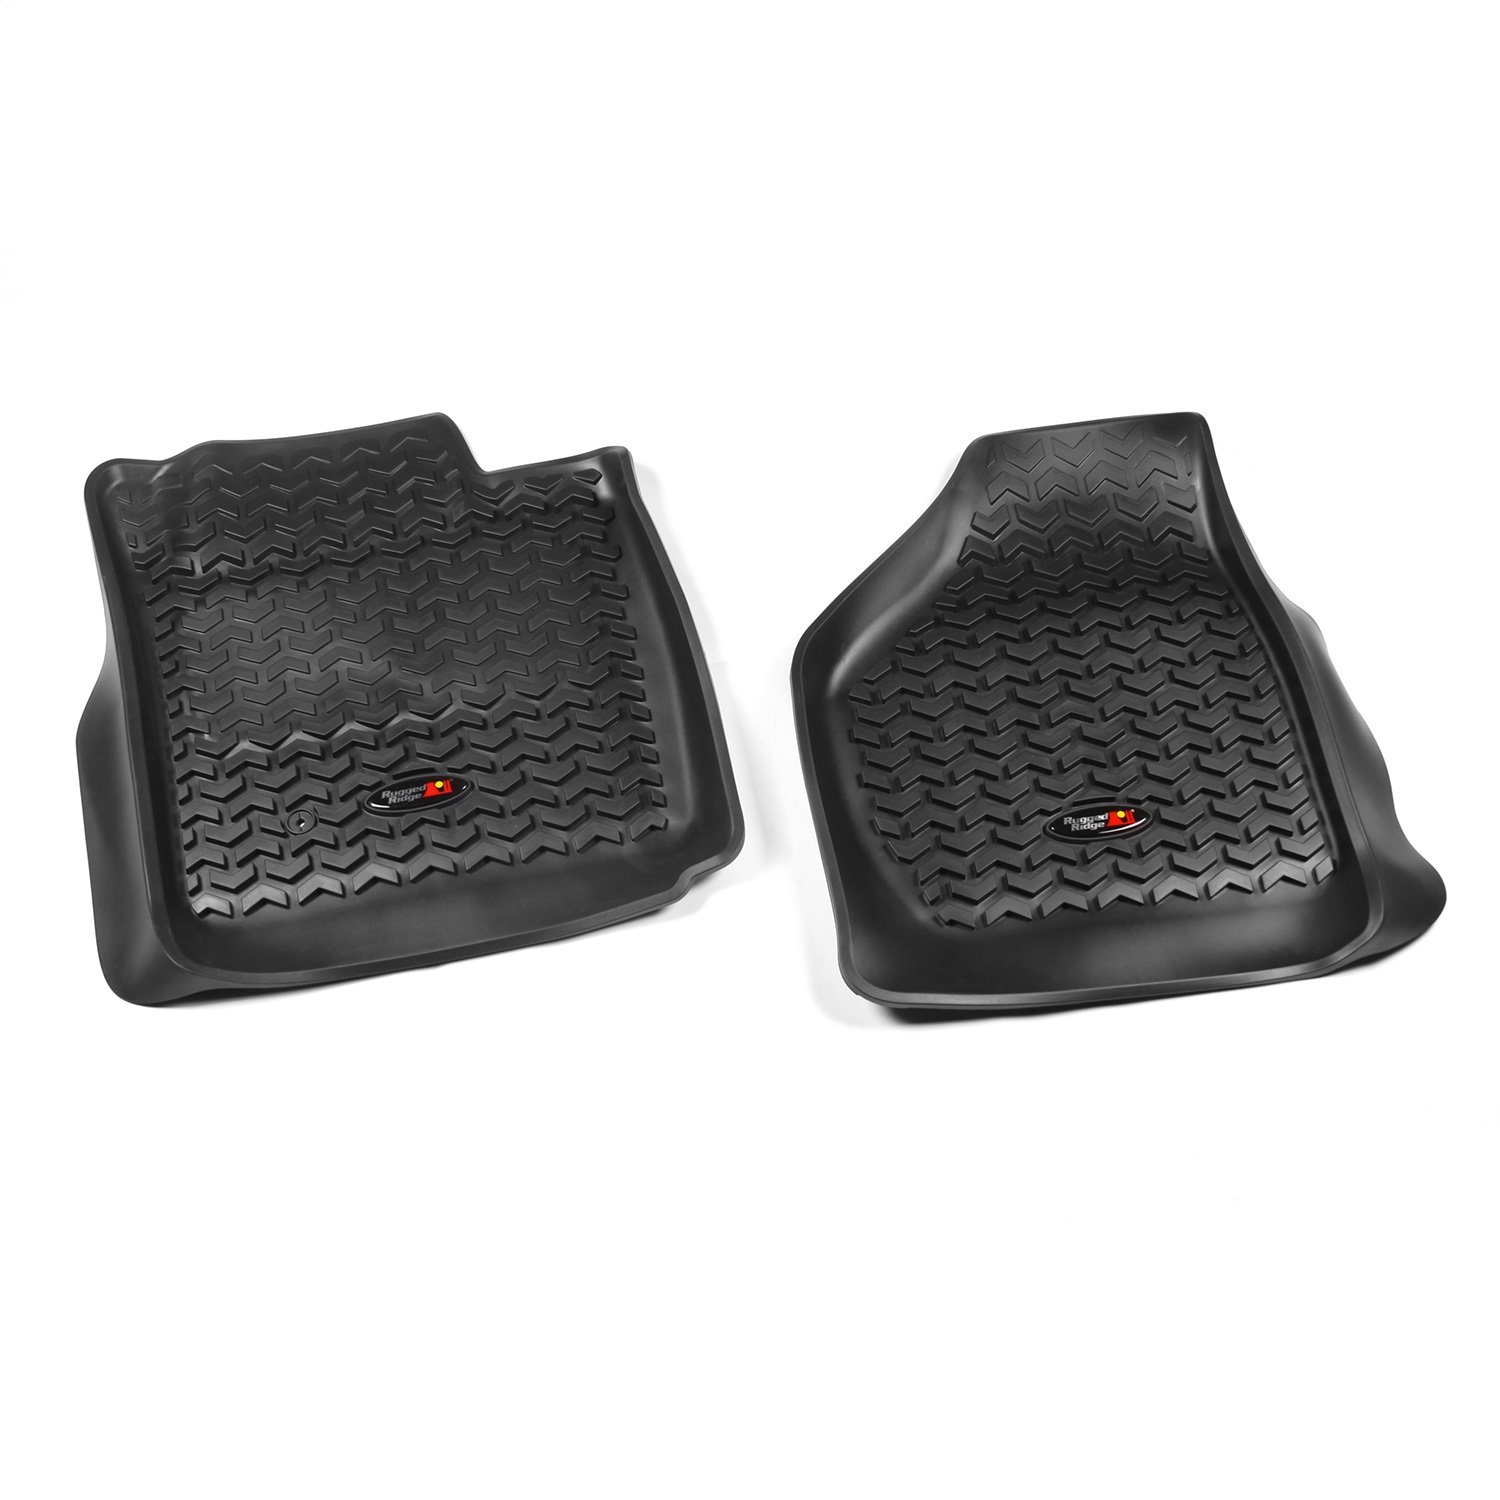 Front Floor Liners for 2008-2010 Ford F-250/F-350 Trucks